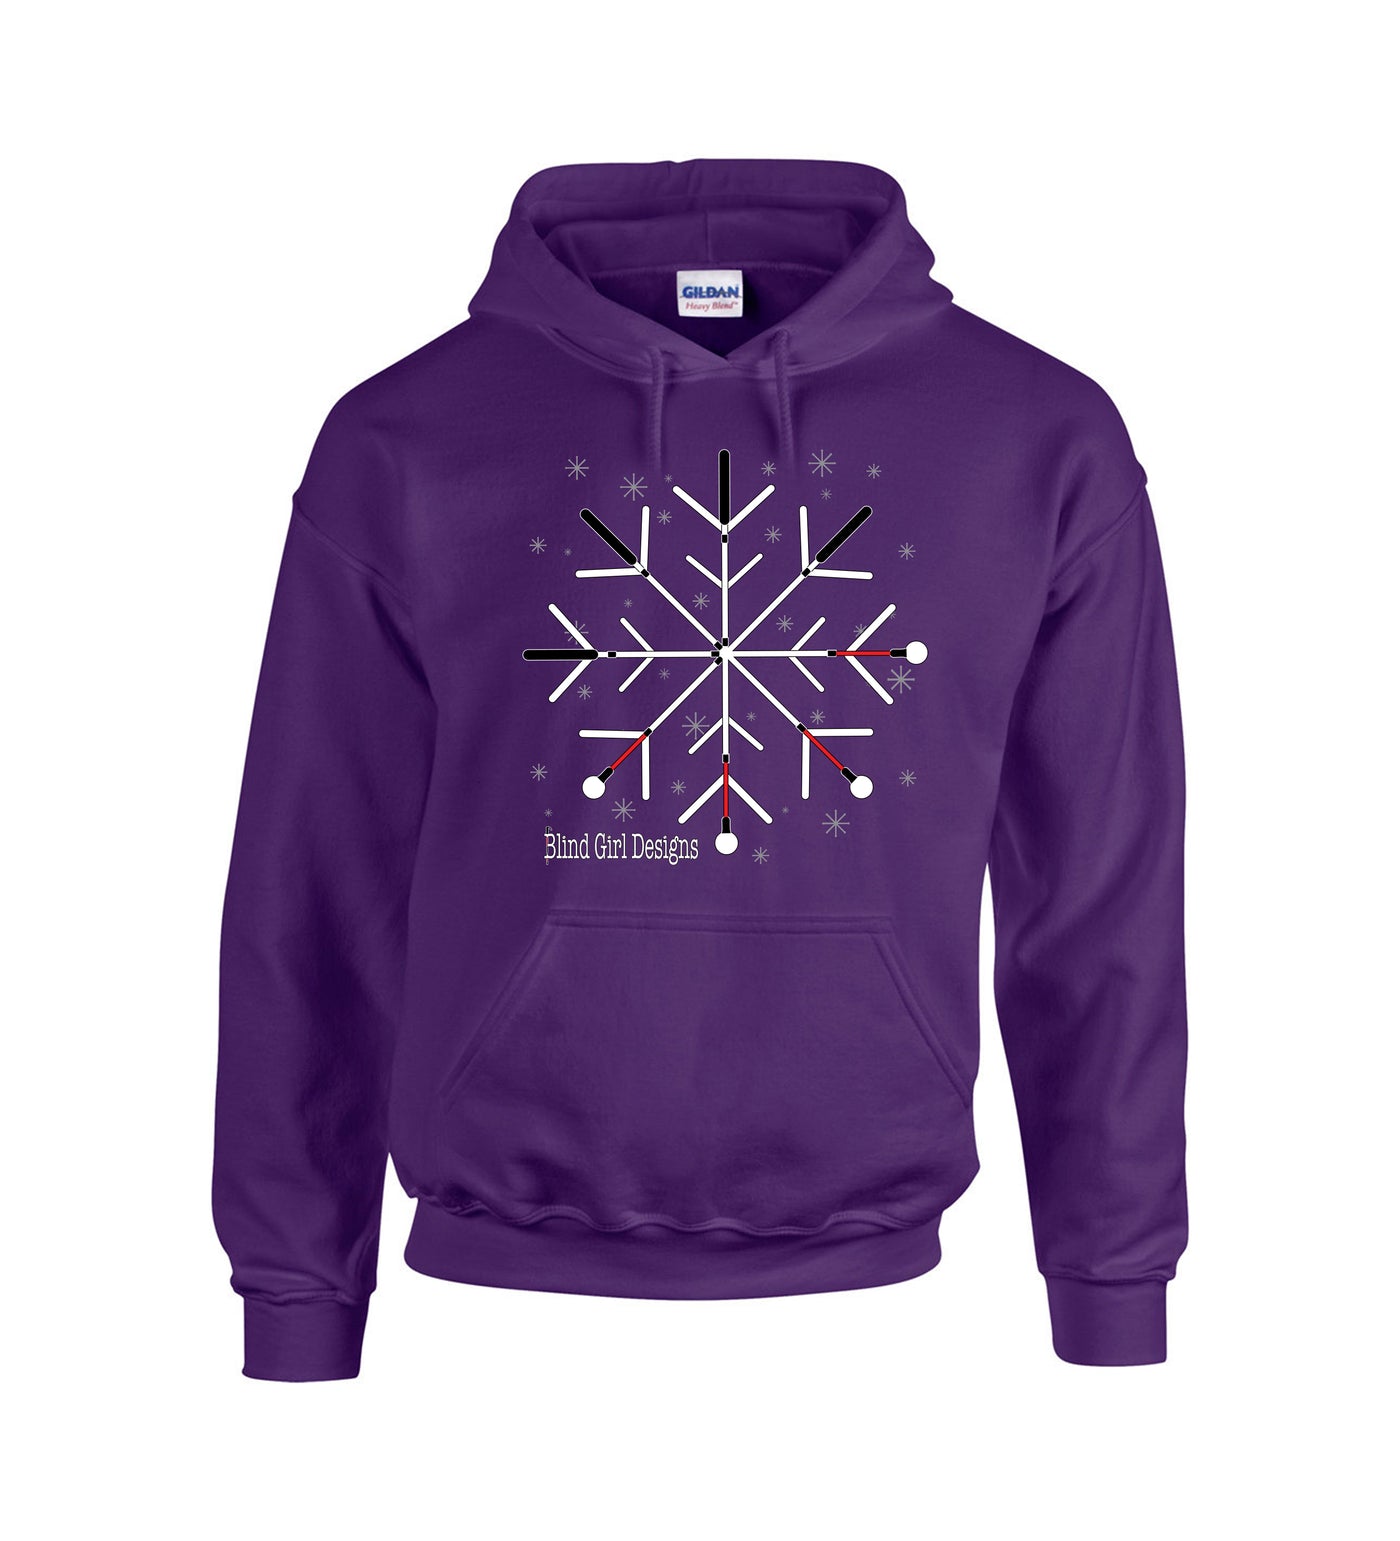 Purple classic, unisex sweatshirt. There is a large chest  print of a snowflake made of crossing blind canes. There are red and white canes to form the snowflake. There are tiny snowflakes sprinkled around the main snowflake. It is a standard sweatshirt fit with a large front pocket and large hood.